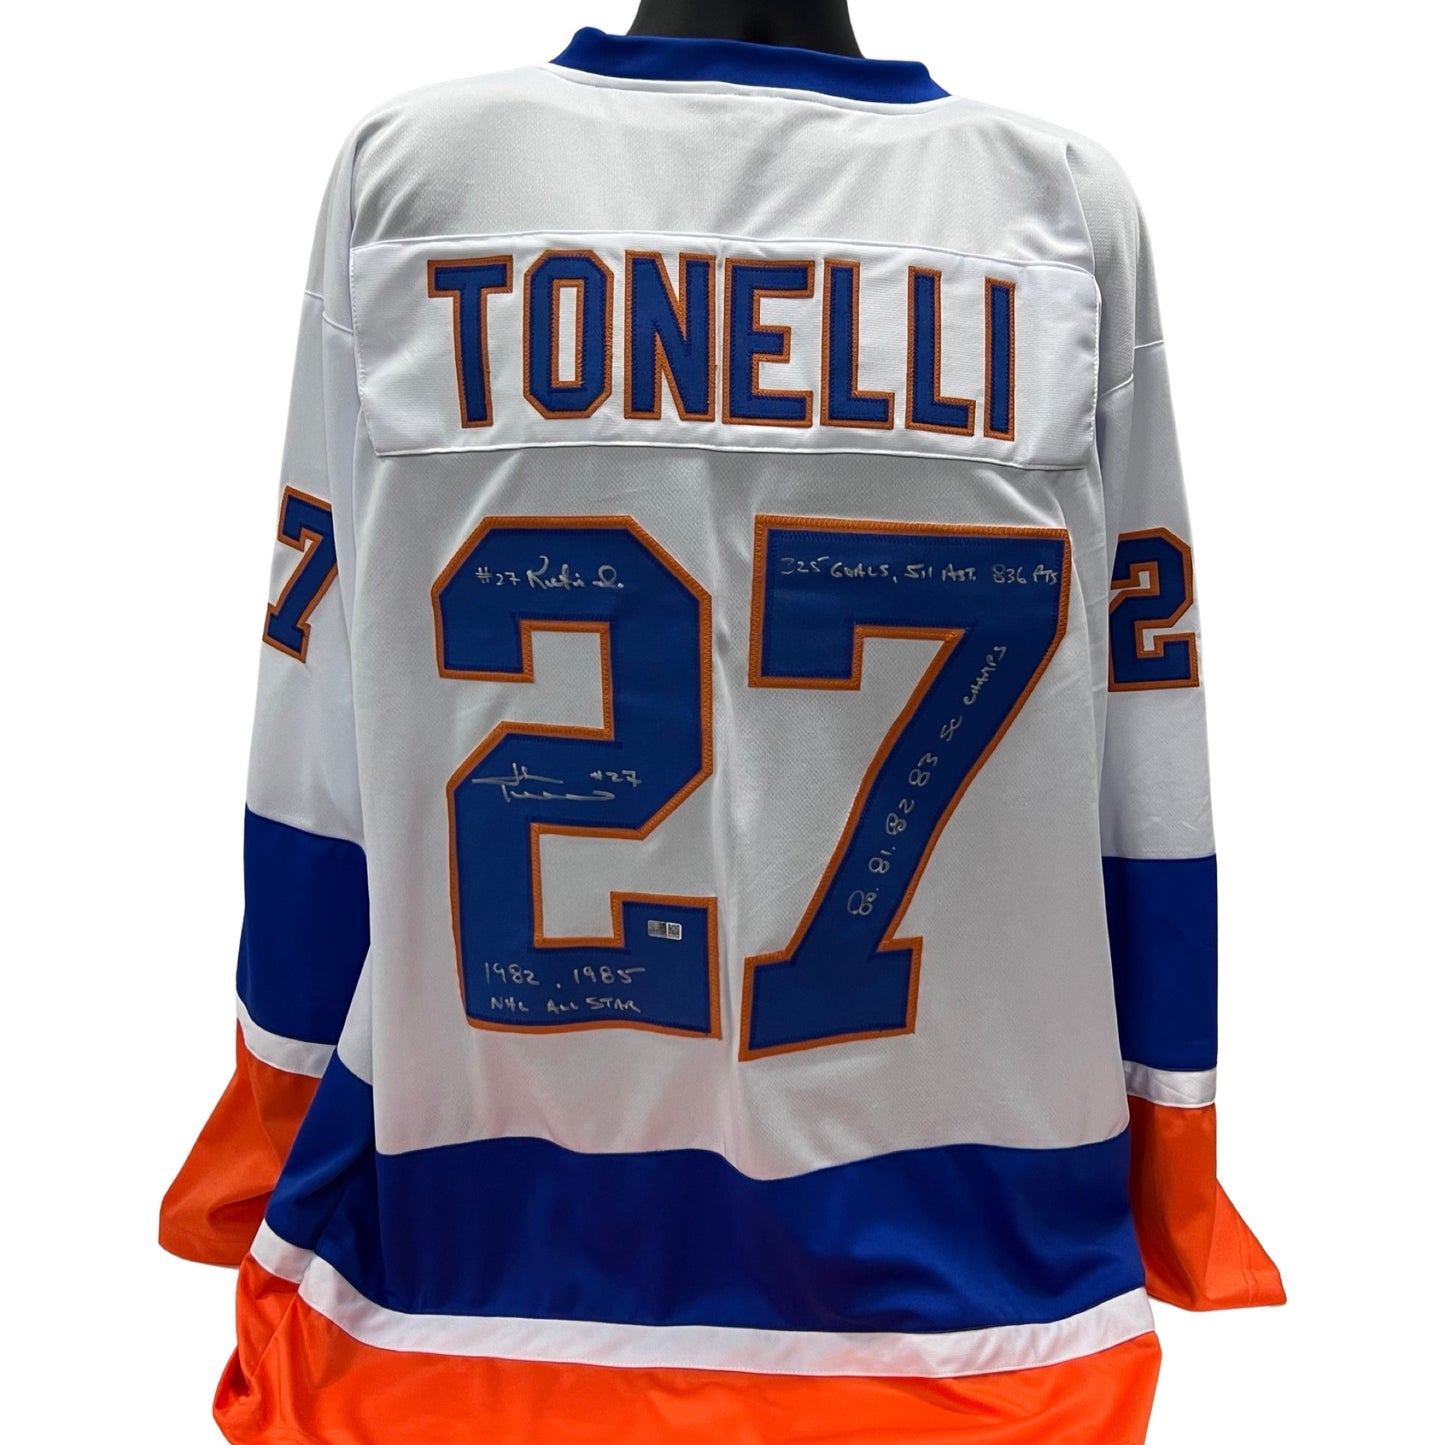 John Tonelli Autographed New York Islanders White Jersey "#27 Retired, 1982 1985 NHL All Star, 325 Goals 511 Assists 836 Points, 80 81 82 83 Champs" Inscriptions Steiner CX